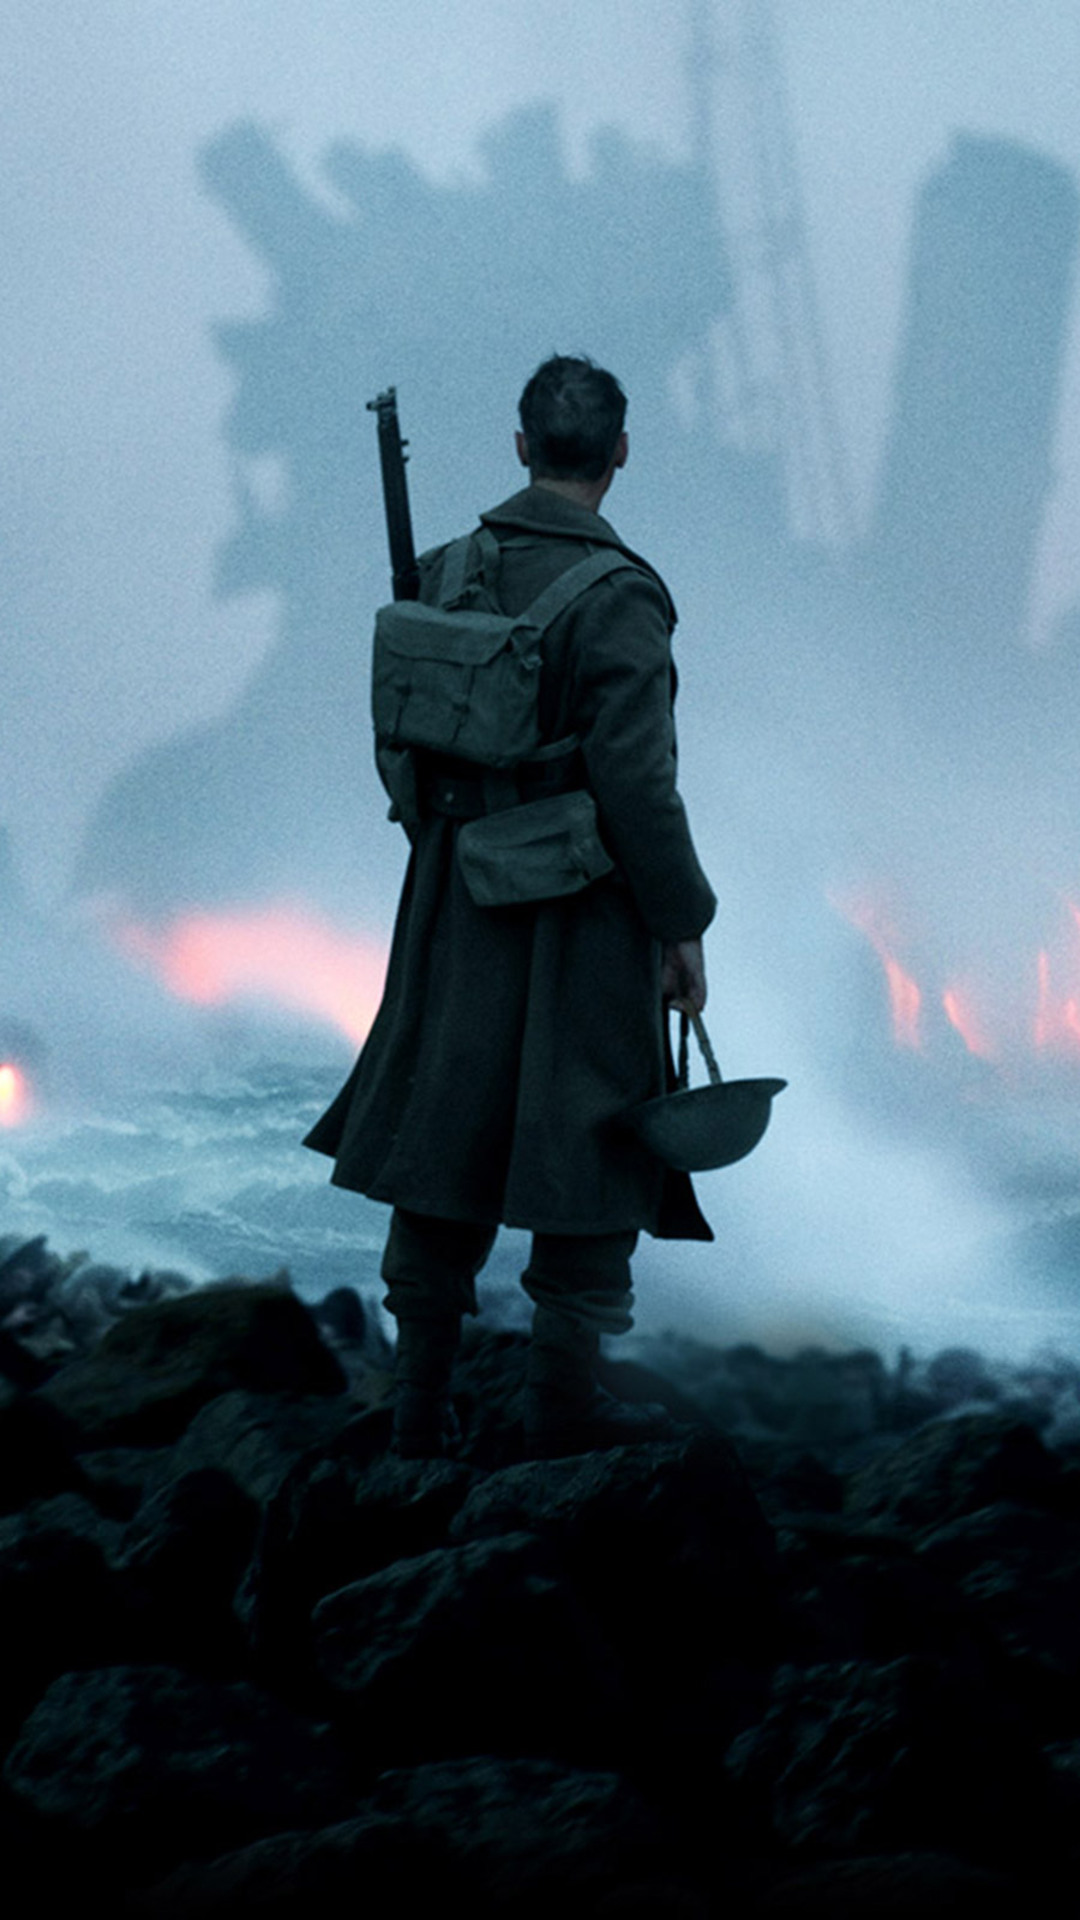 1080x1920 Dunkirk 2017 Movie Iphone 7,6s,6 Plus, Pixel xl ,One Plus 3,3t,5 HD 4k Wallpapers 